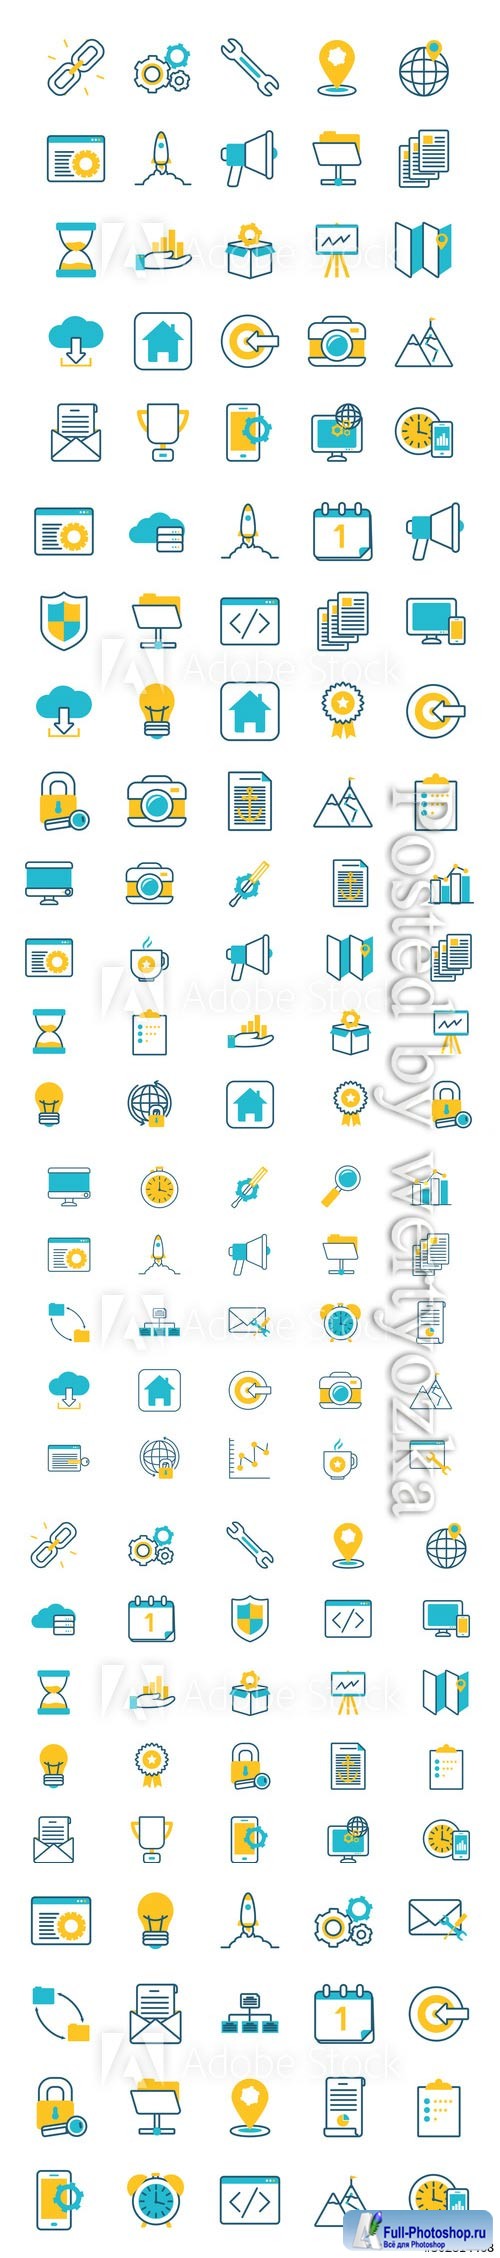 Elearning and business set icons